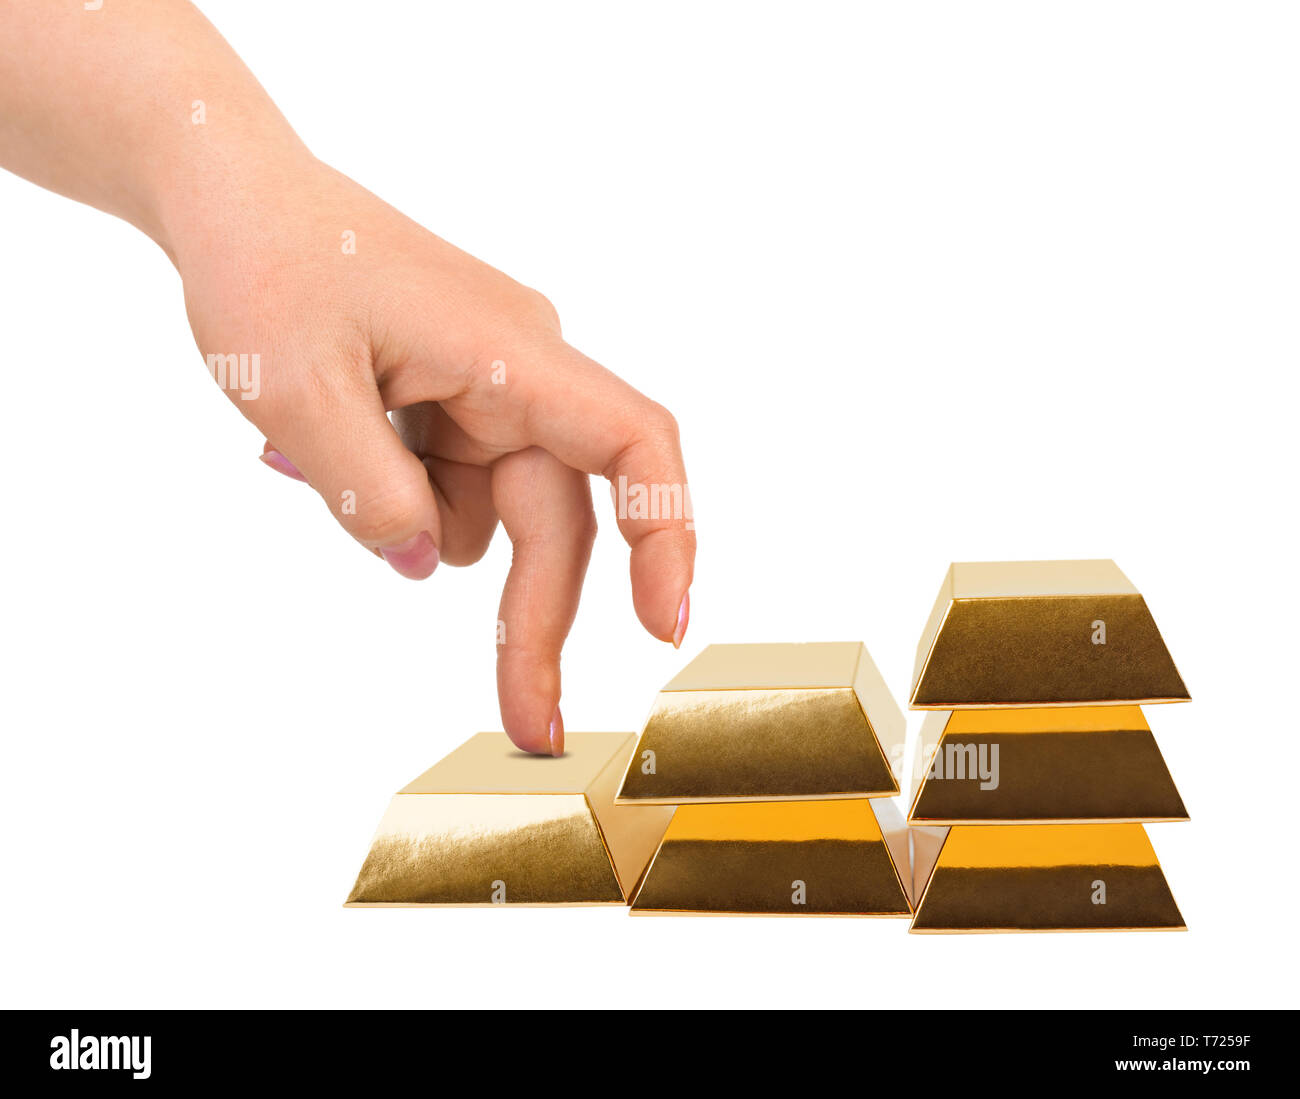 Hand and stairs made of gold bars Stock Photo